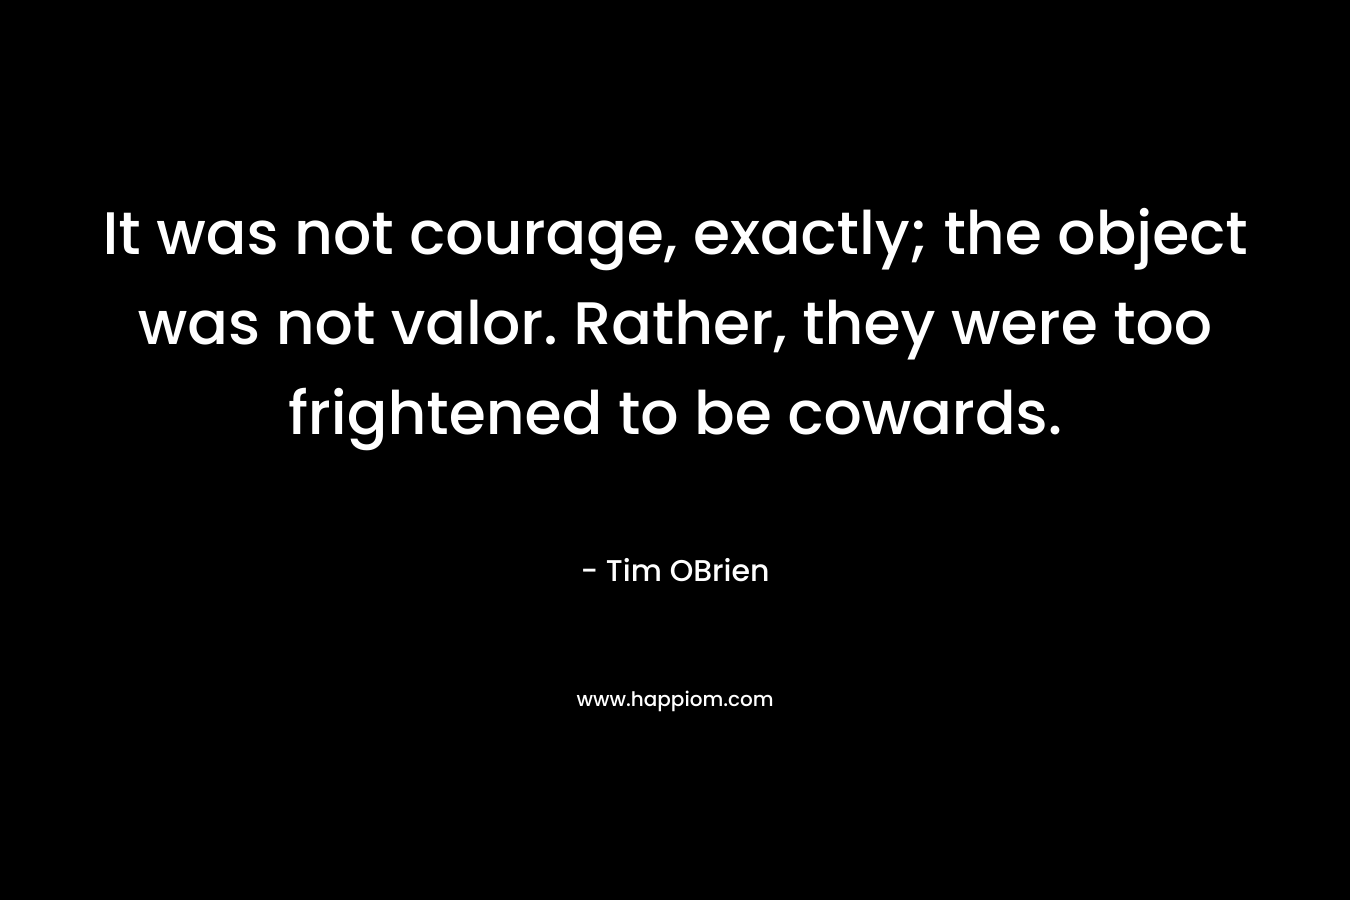 It was not courage, exactly; the object was not valor. Rather, they were too frightened to be cowards. – Tim OBrien